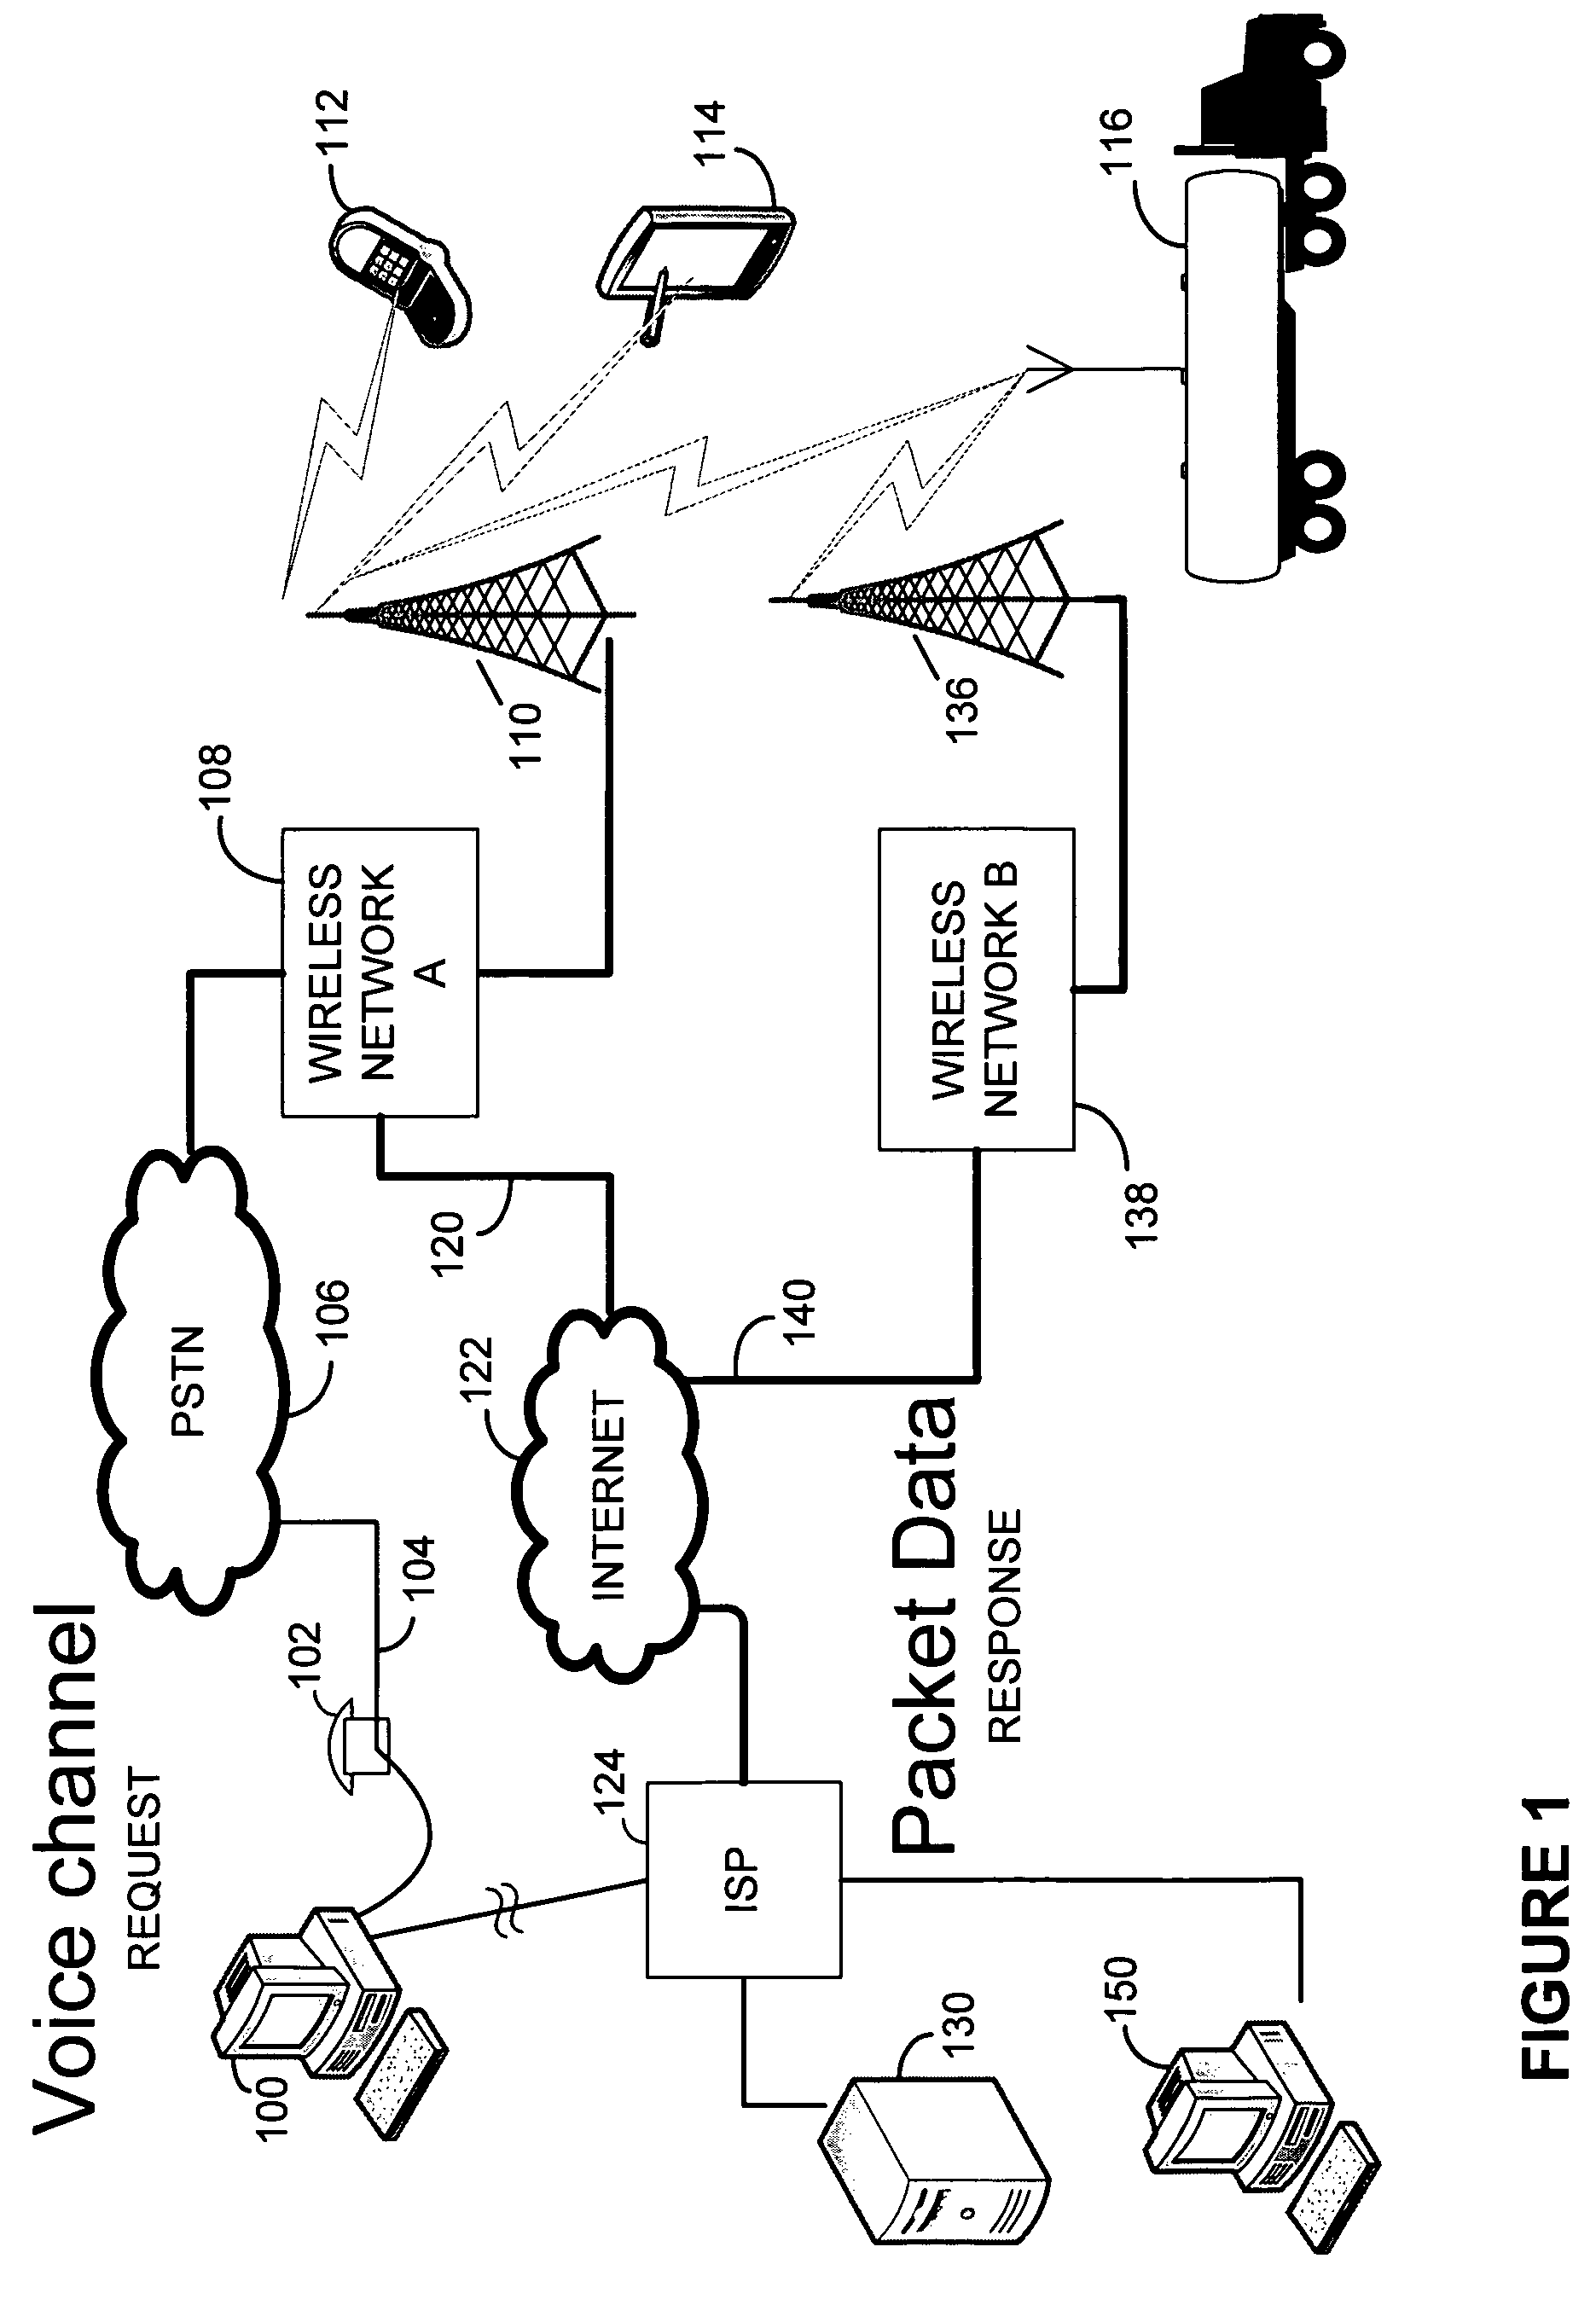 Voice channel control of wireless packet data communications